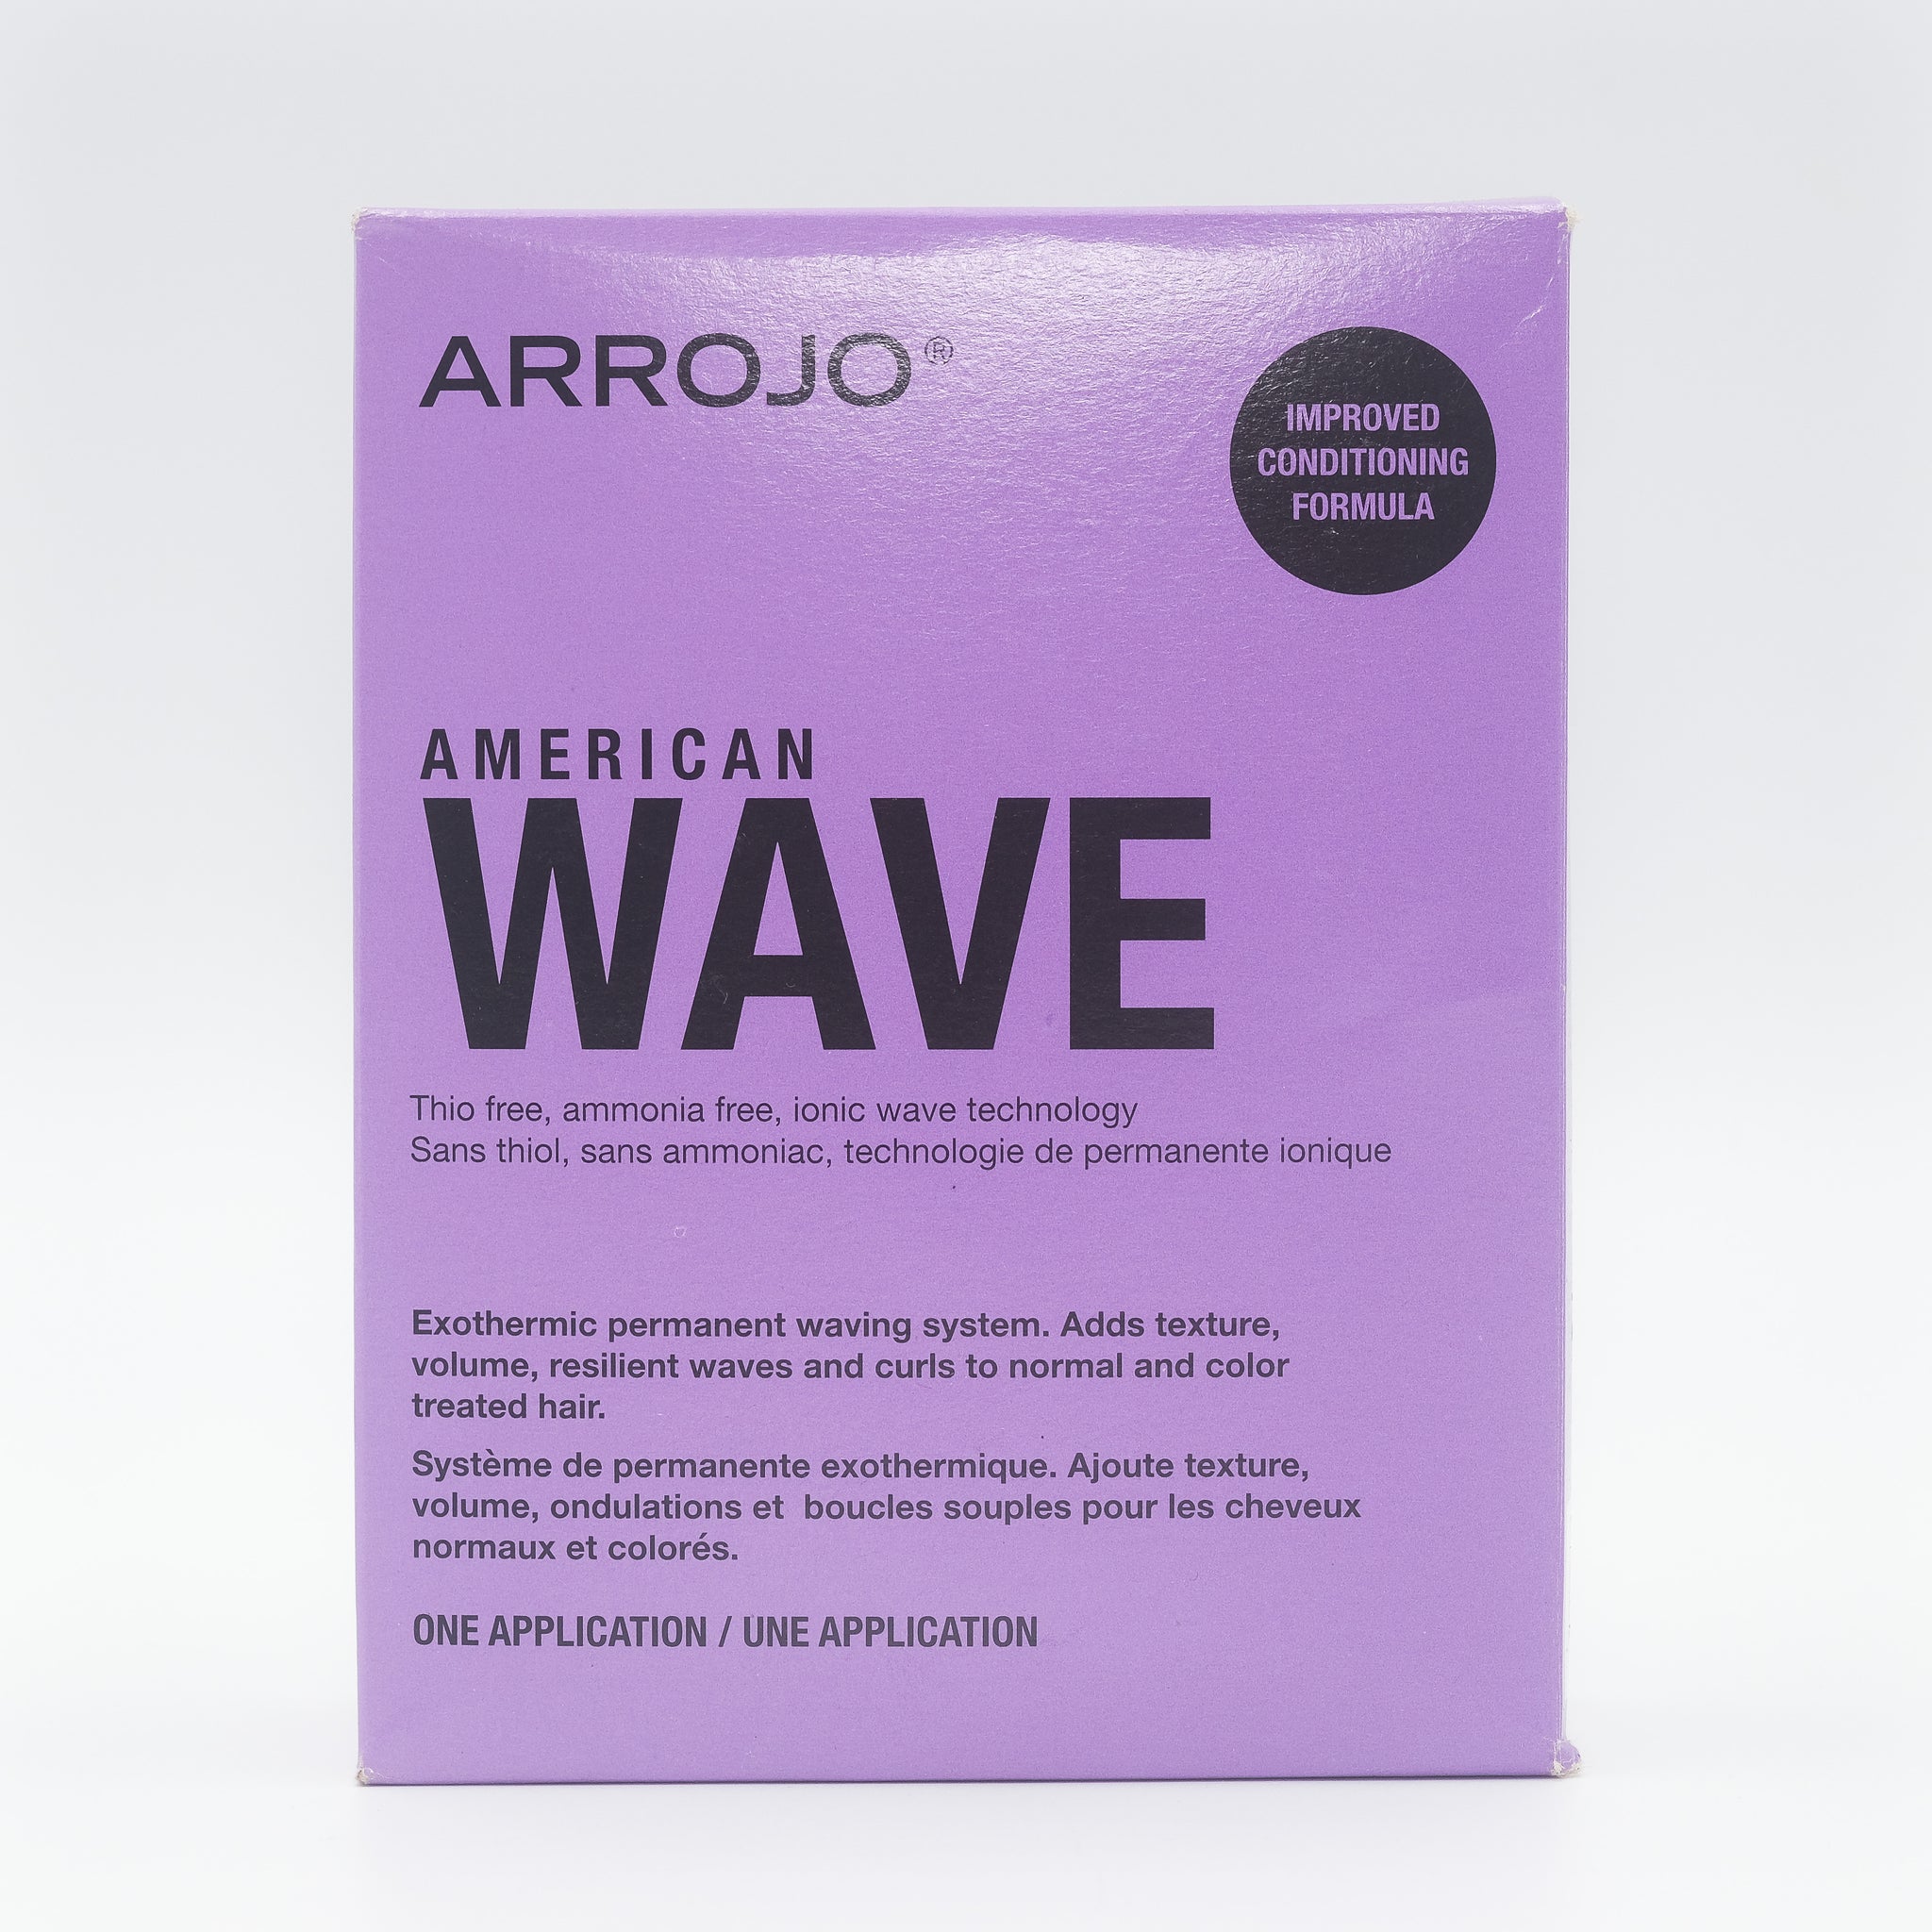 ARROJO American Wave Exothermic Permanent Waving System